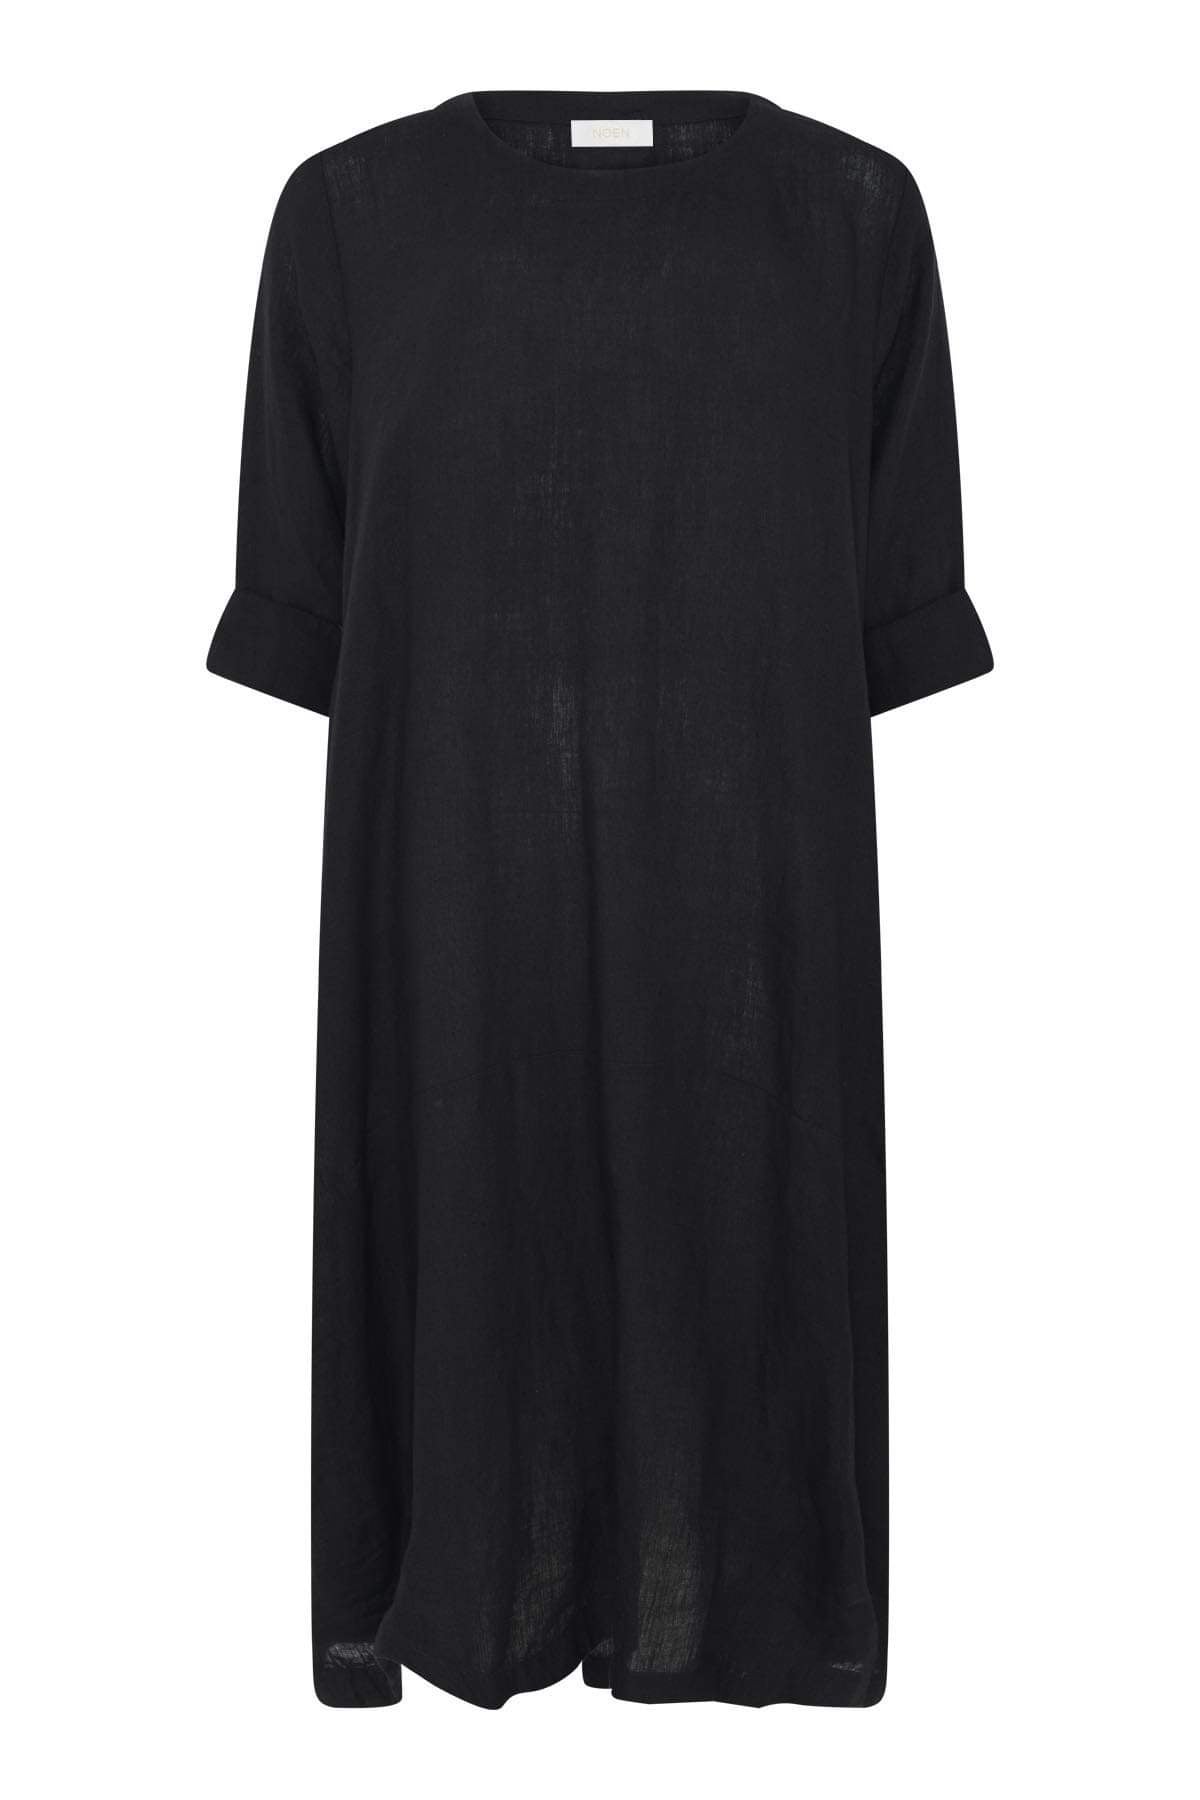 Some linen dress with round neck and long sleeves